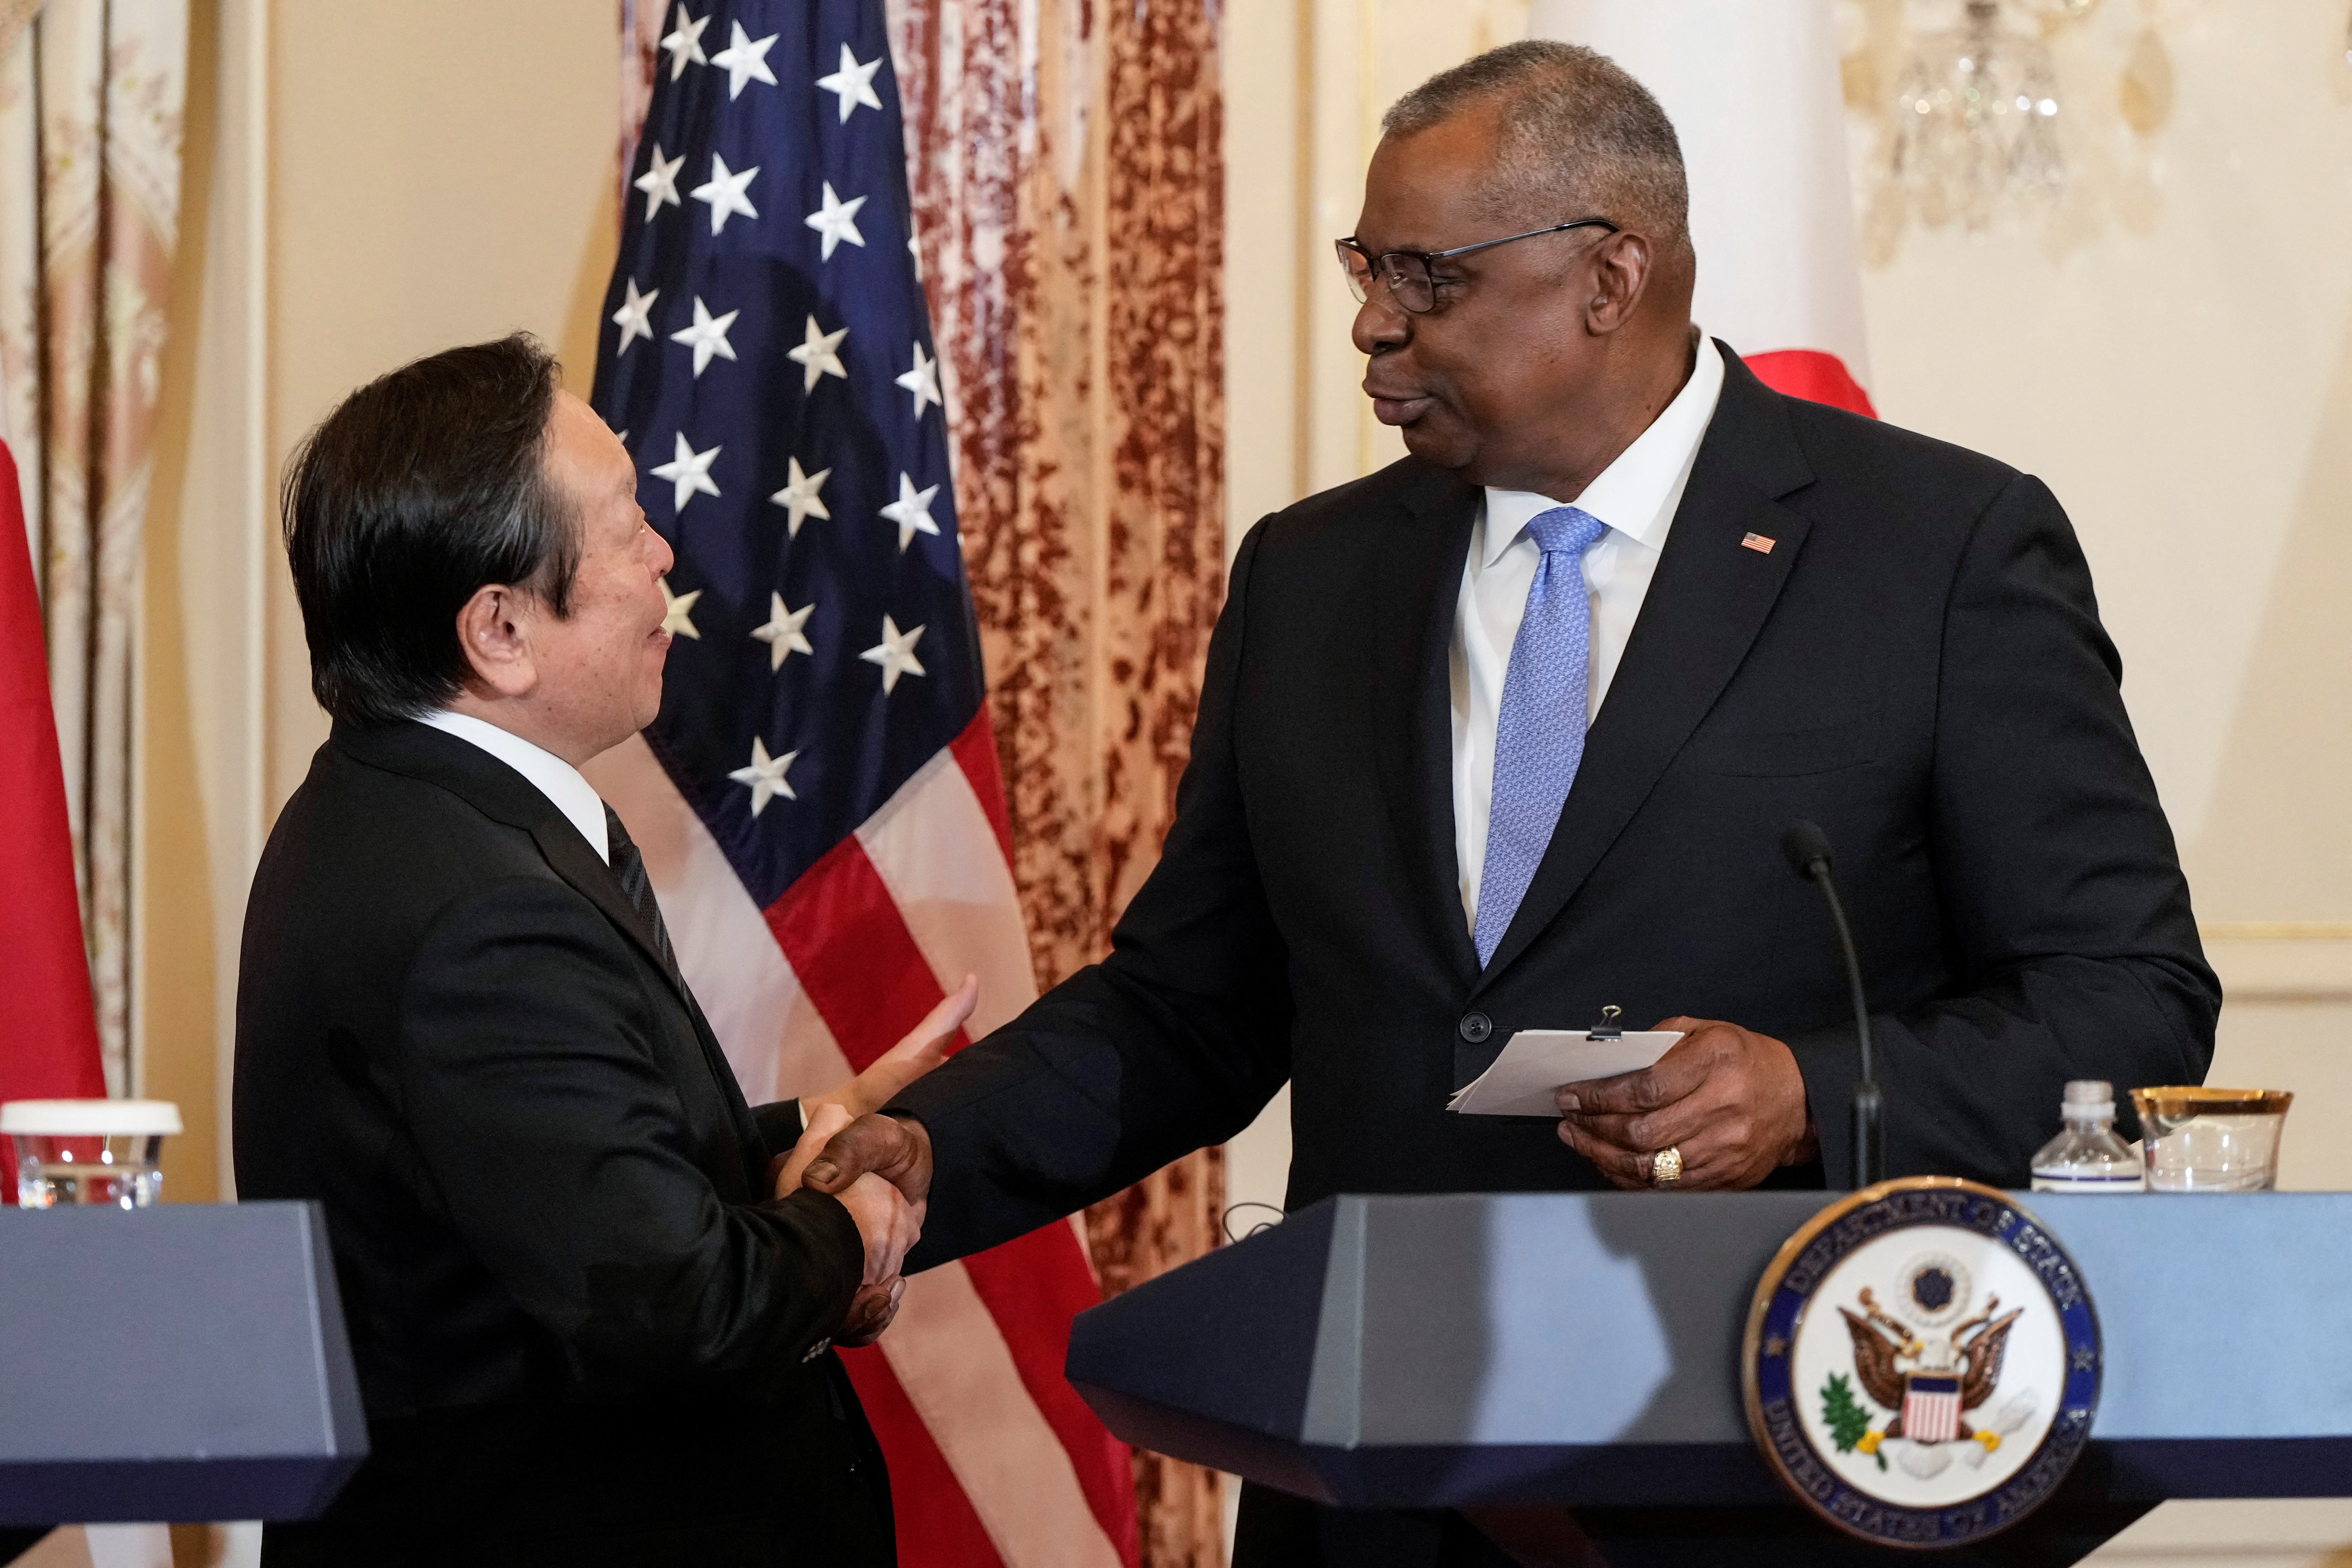 U.S. Secretary of State Blinken and Defense Secretary Austin host 2023 U.S.-Japan Security Consultative Committee meeting at the State Department in Washington